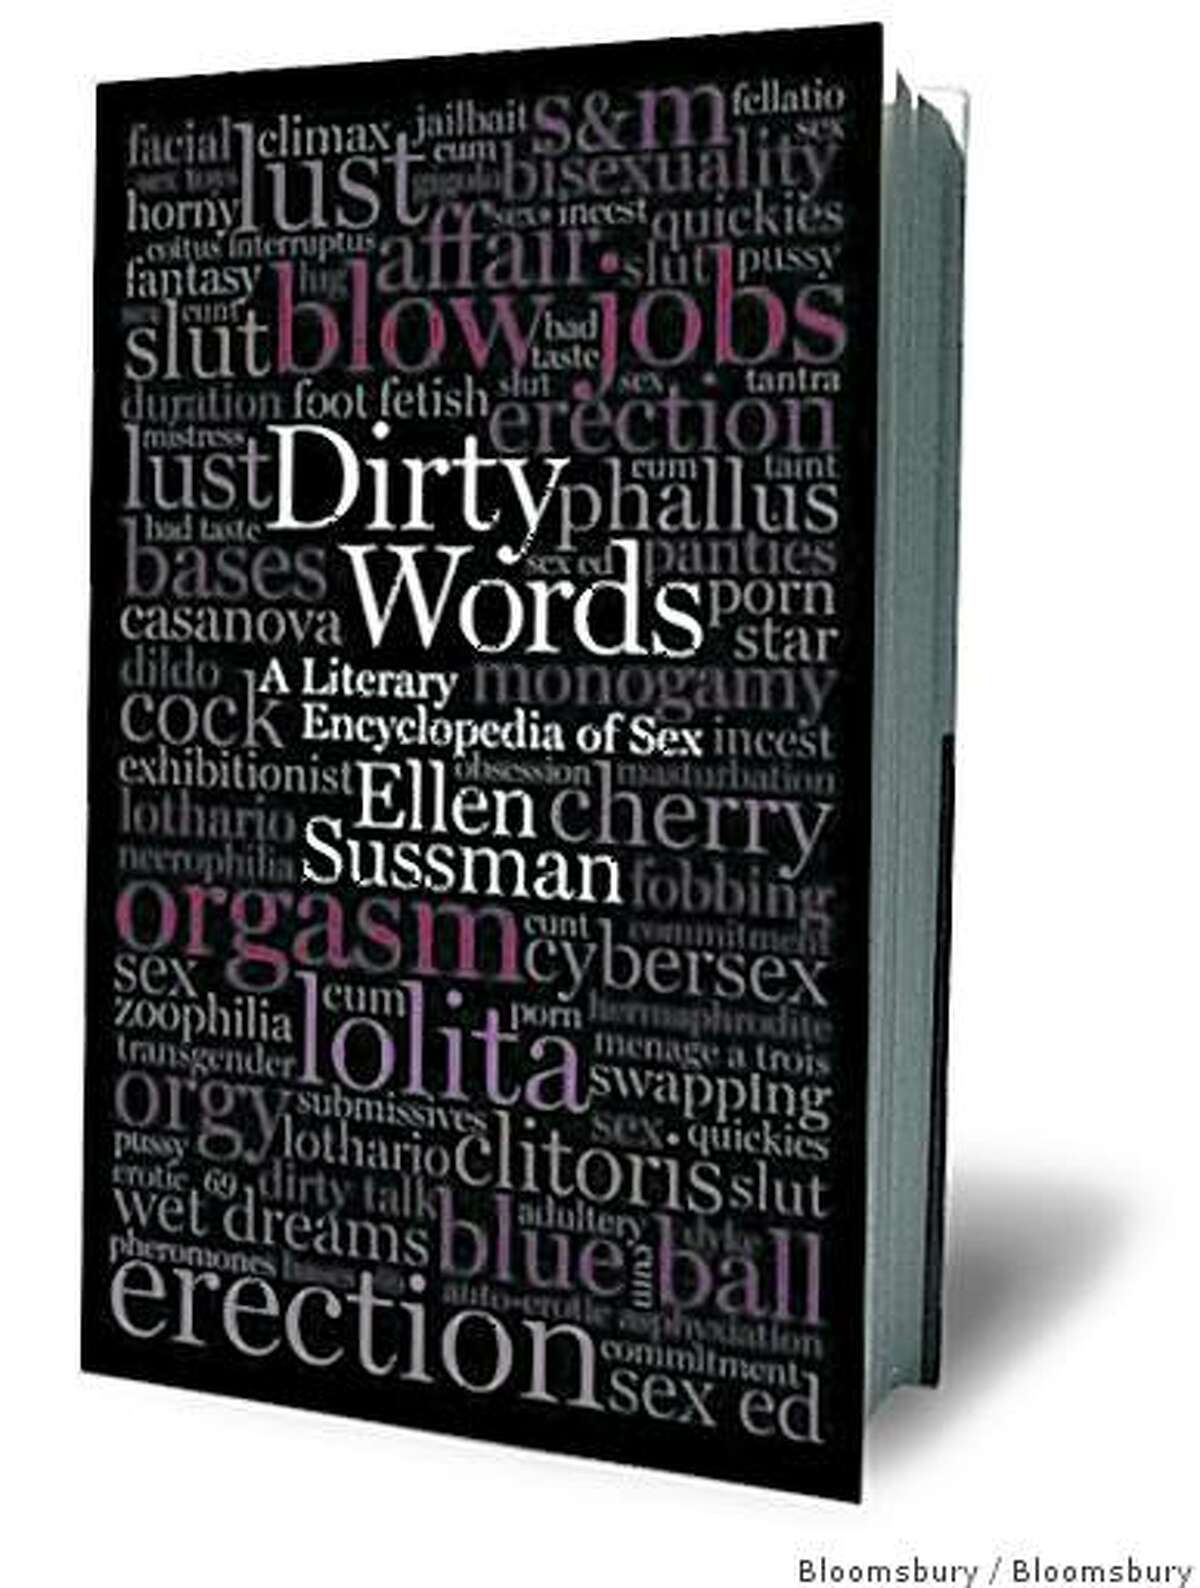 "Dirty Words, A Literary Encyclopedia of Sex", By Ellen Sussman, published by Bloomsbury.